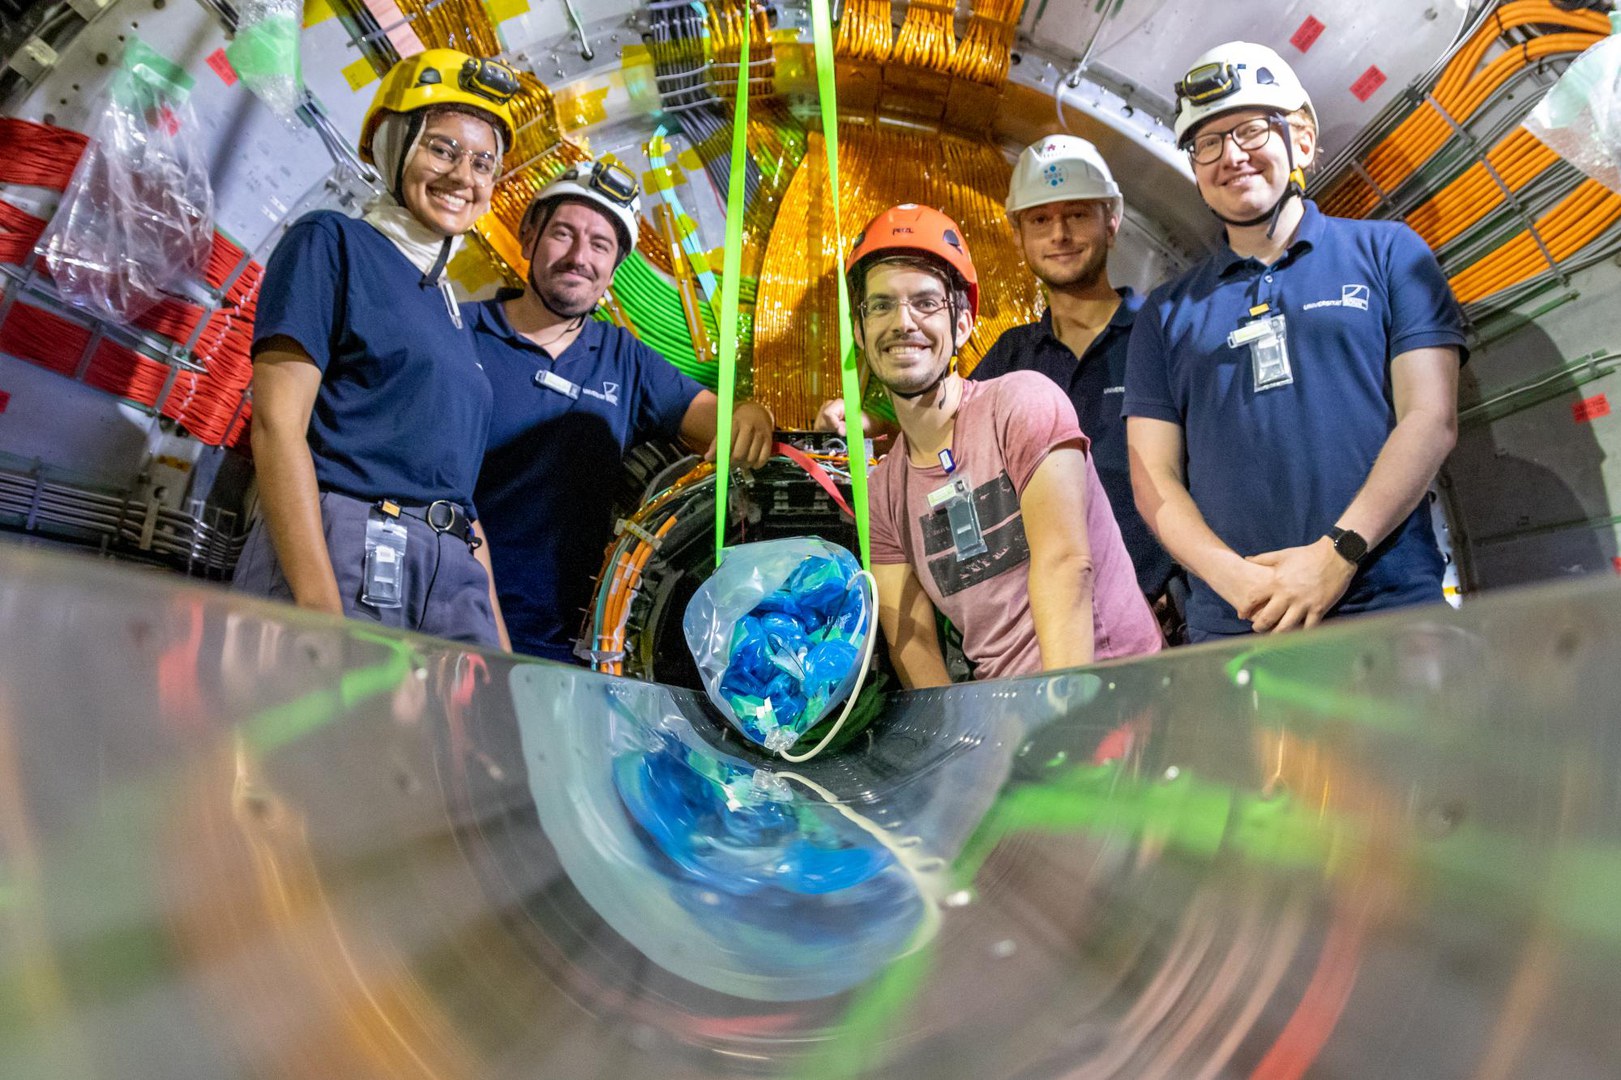 Many physicists at the University of Bonn are working on the Belle II experiment